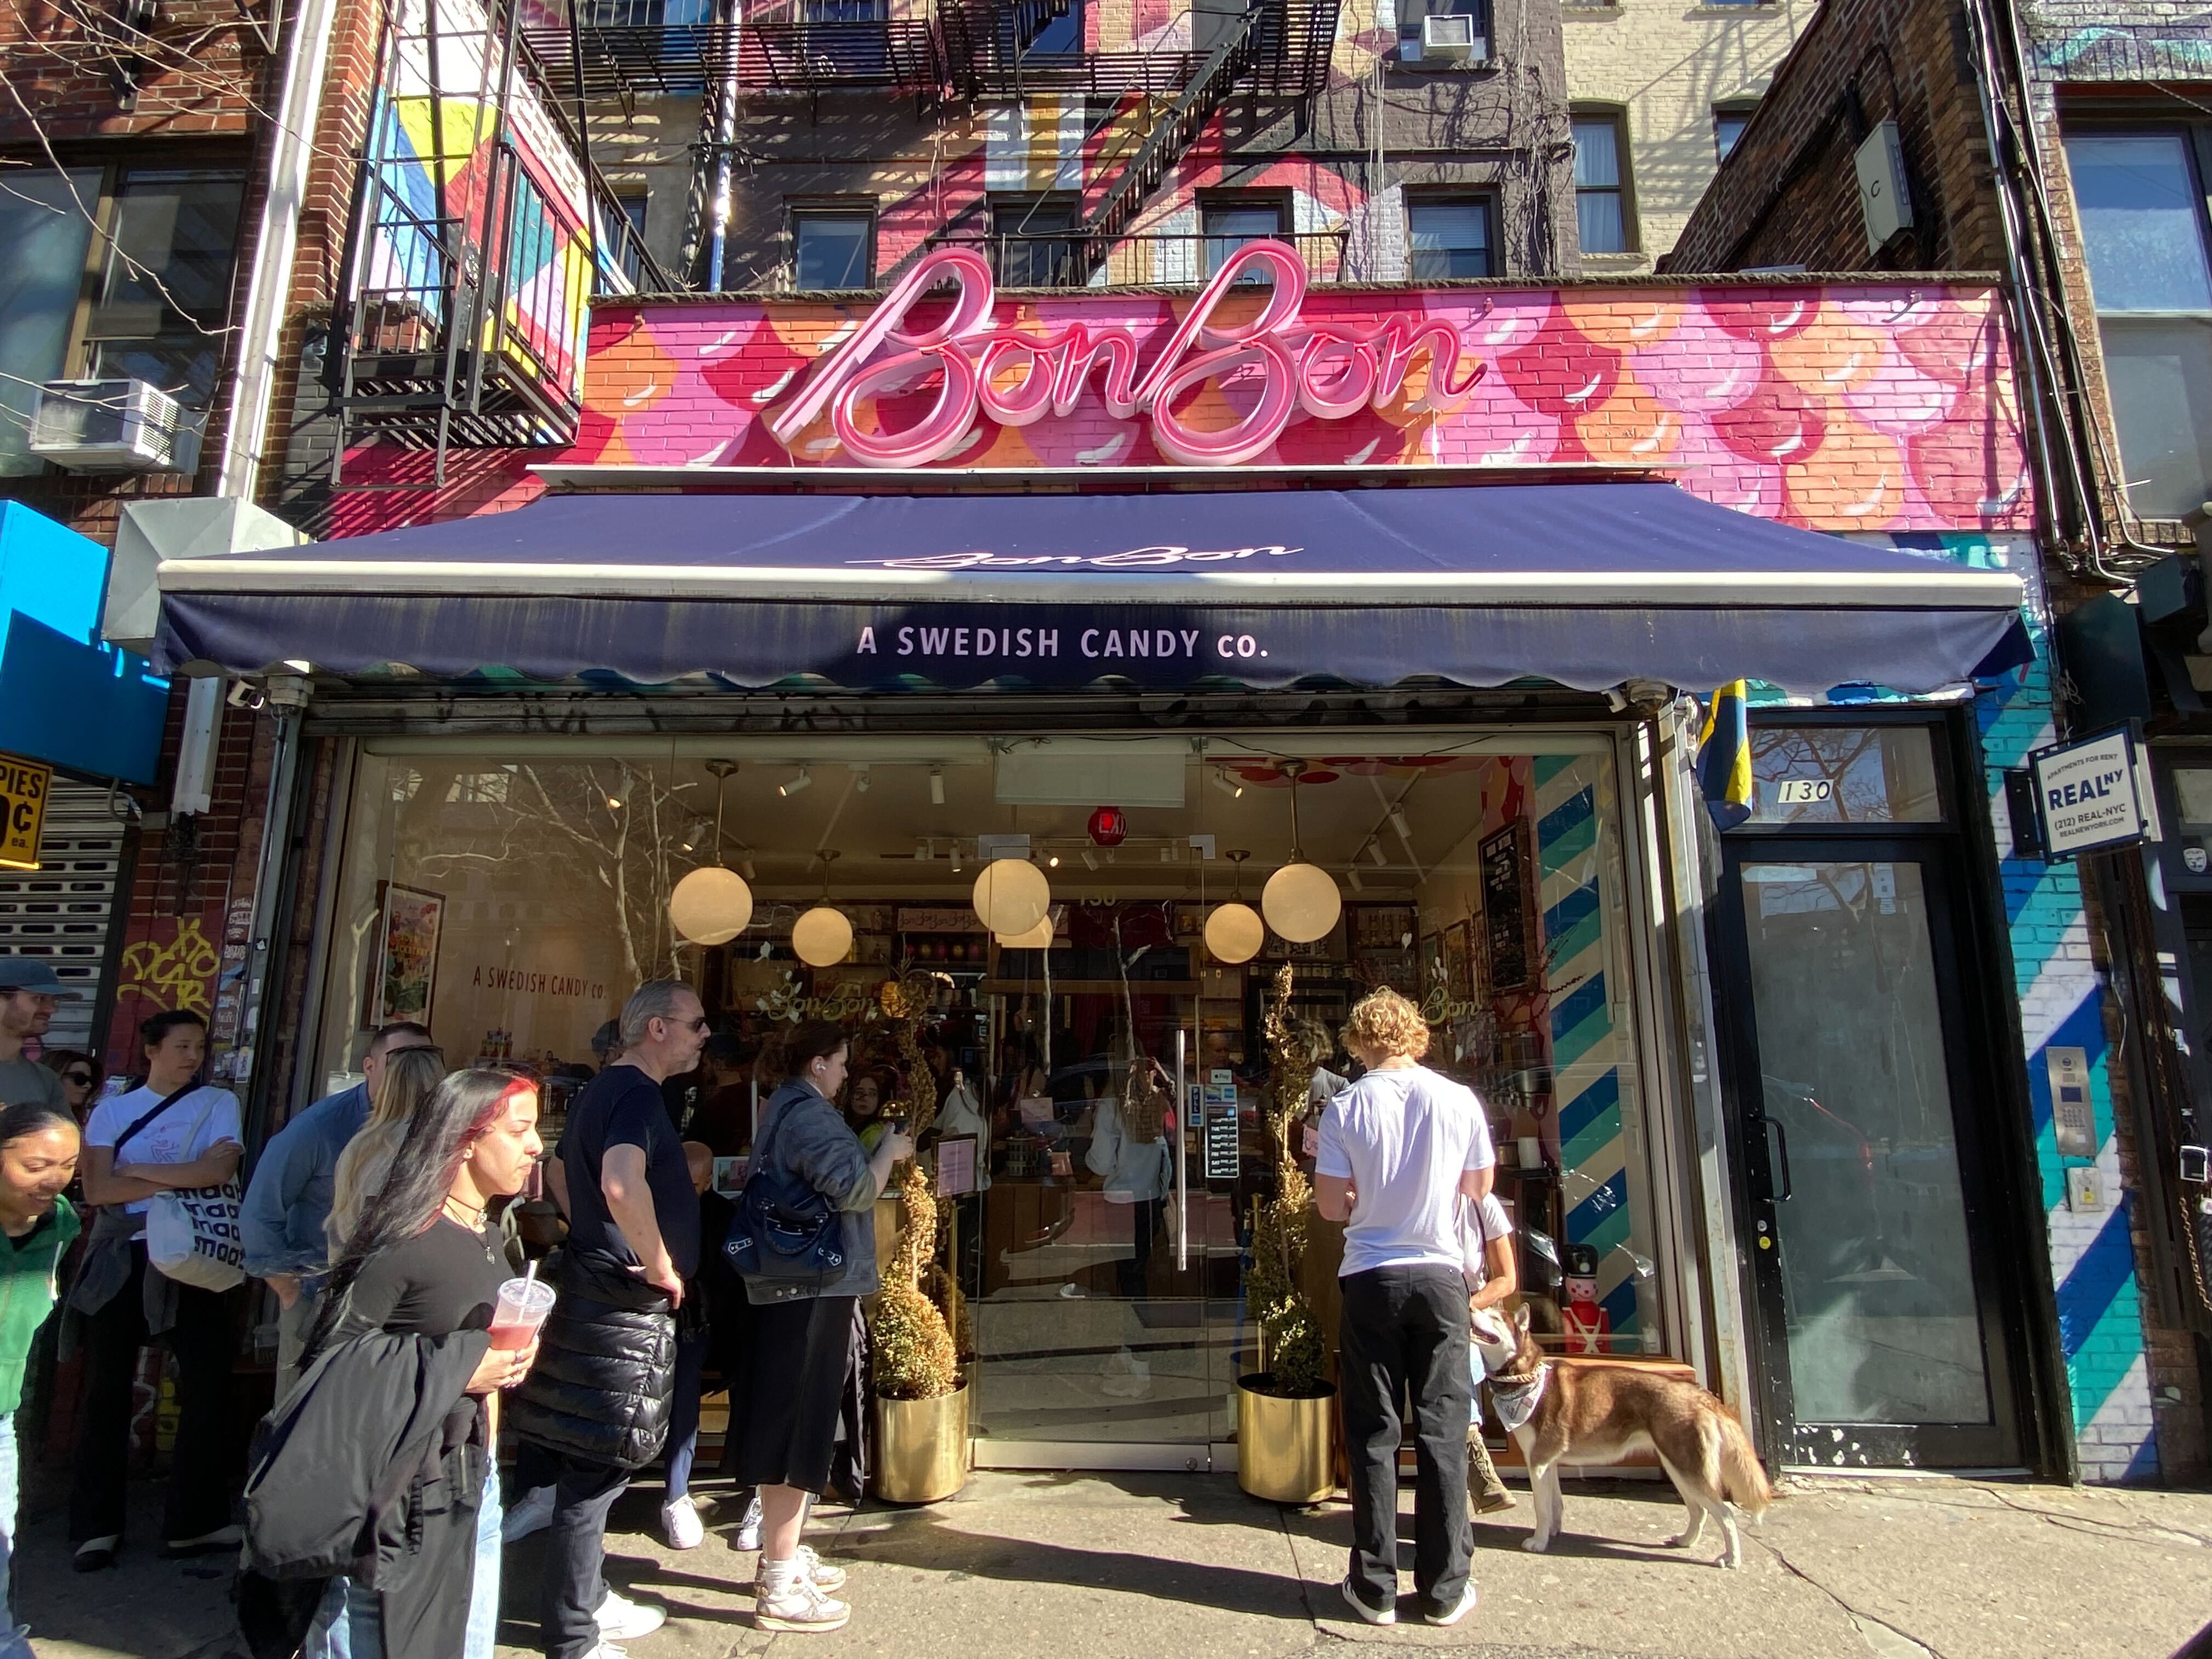 A group of people waits in front of BonBon candy store in the Lower East Side.